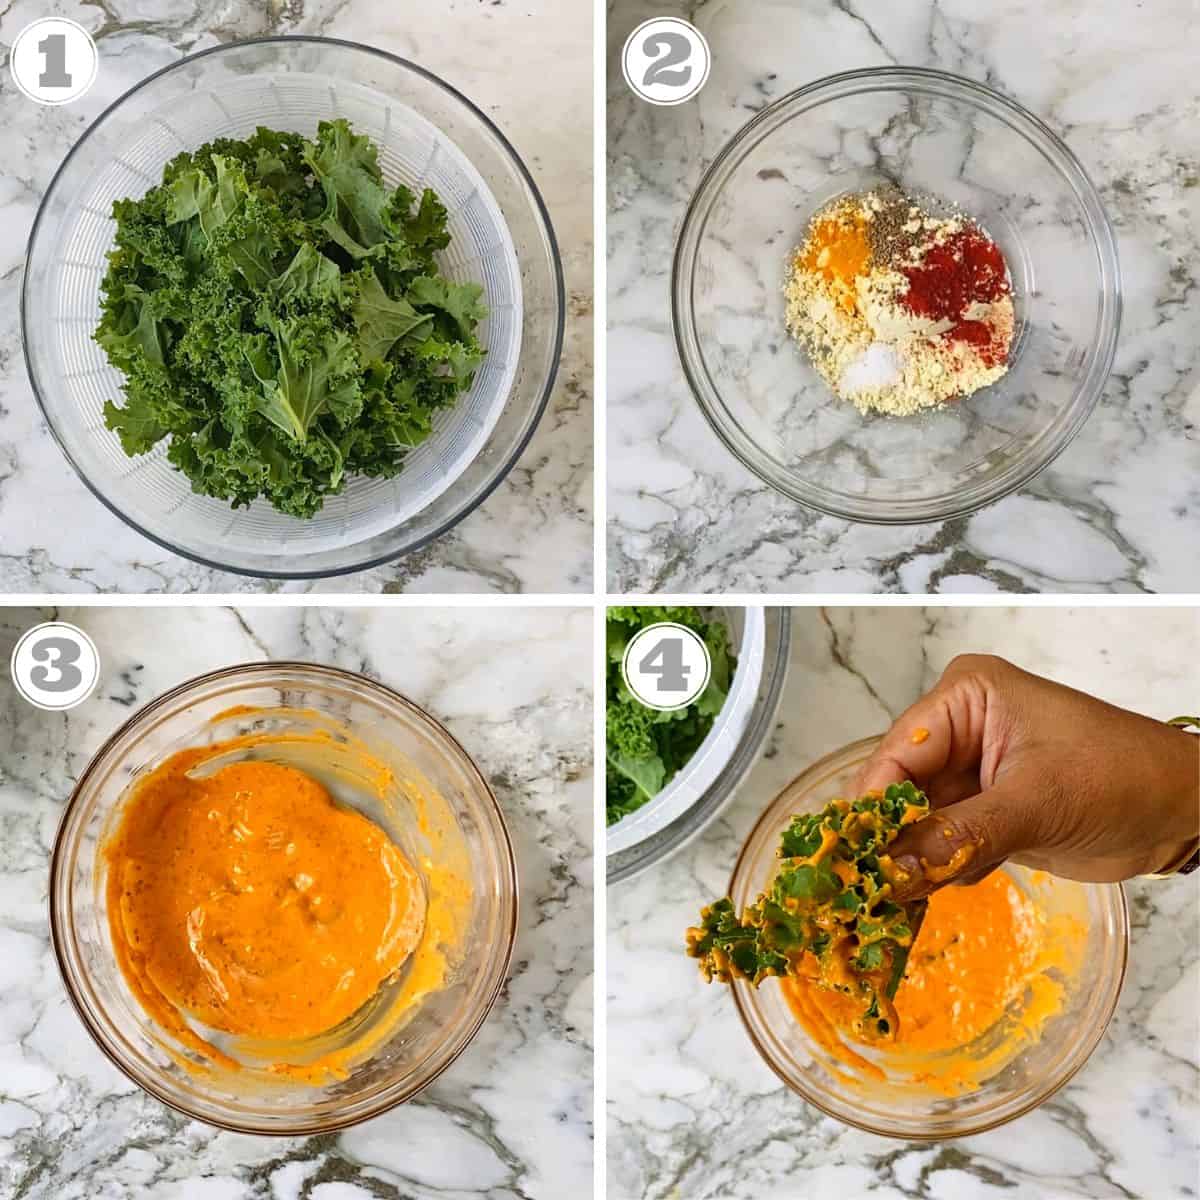 photos one through four showing how to prep kale to make kale chips